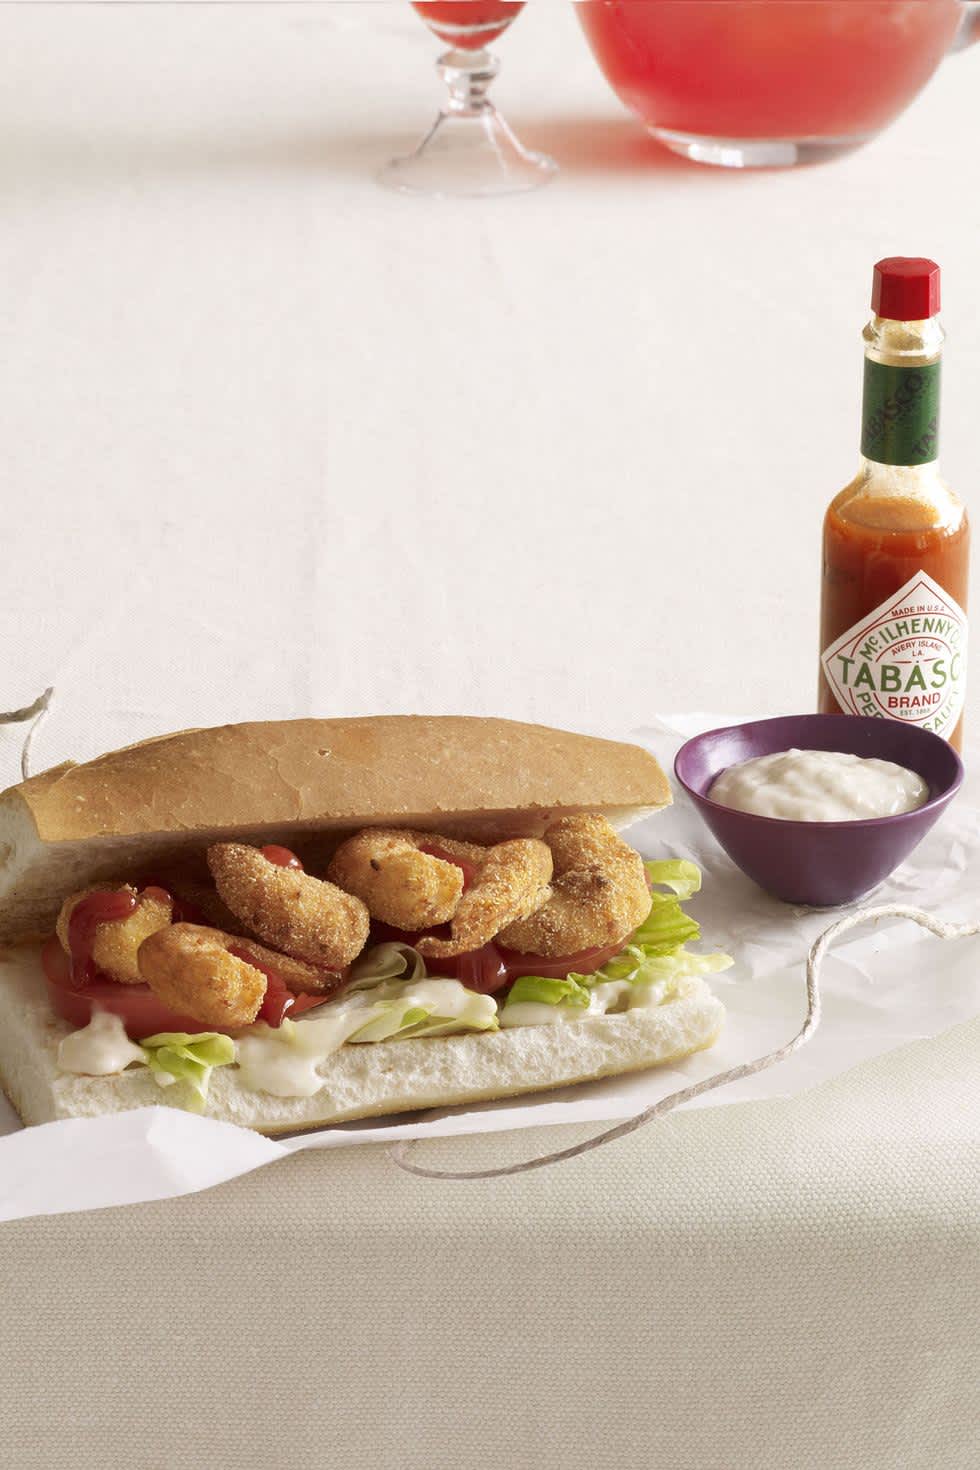 Fried shrimp po’boy served with a side of tartar sauce and hot sauce